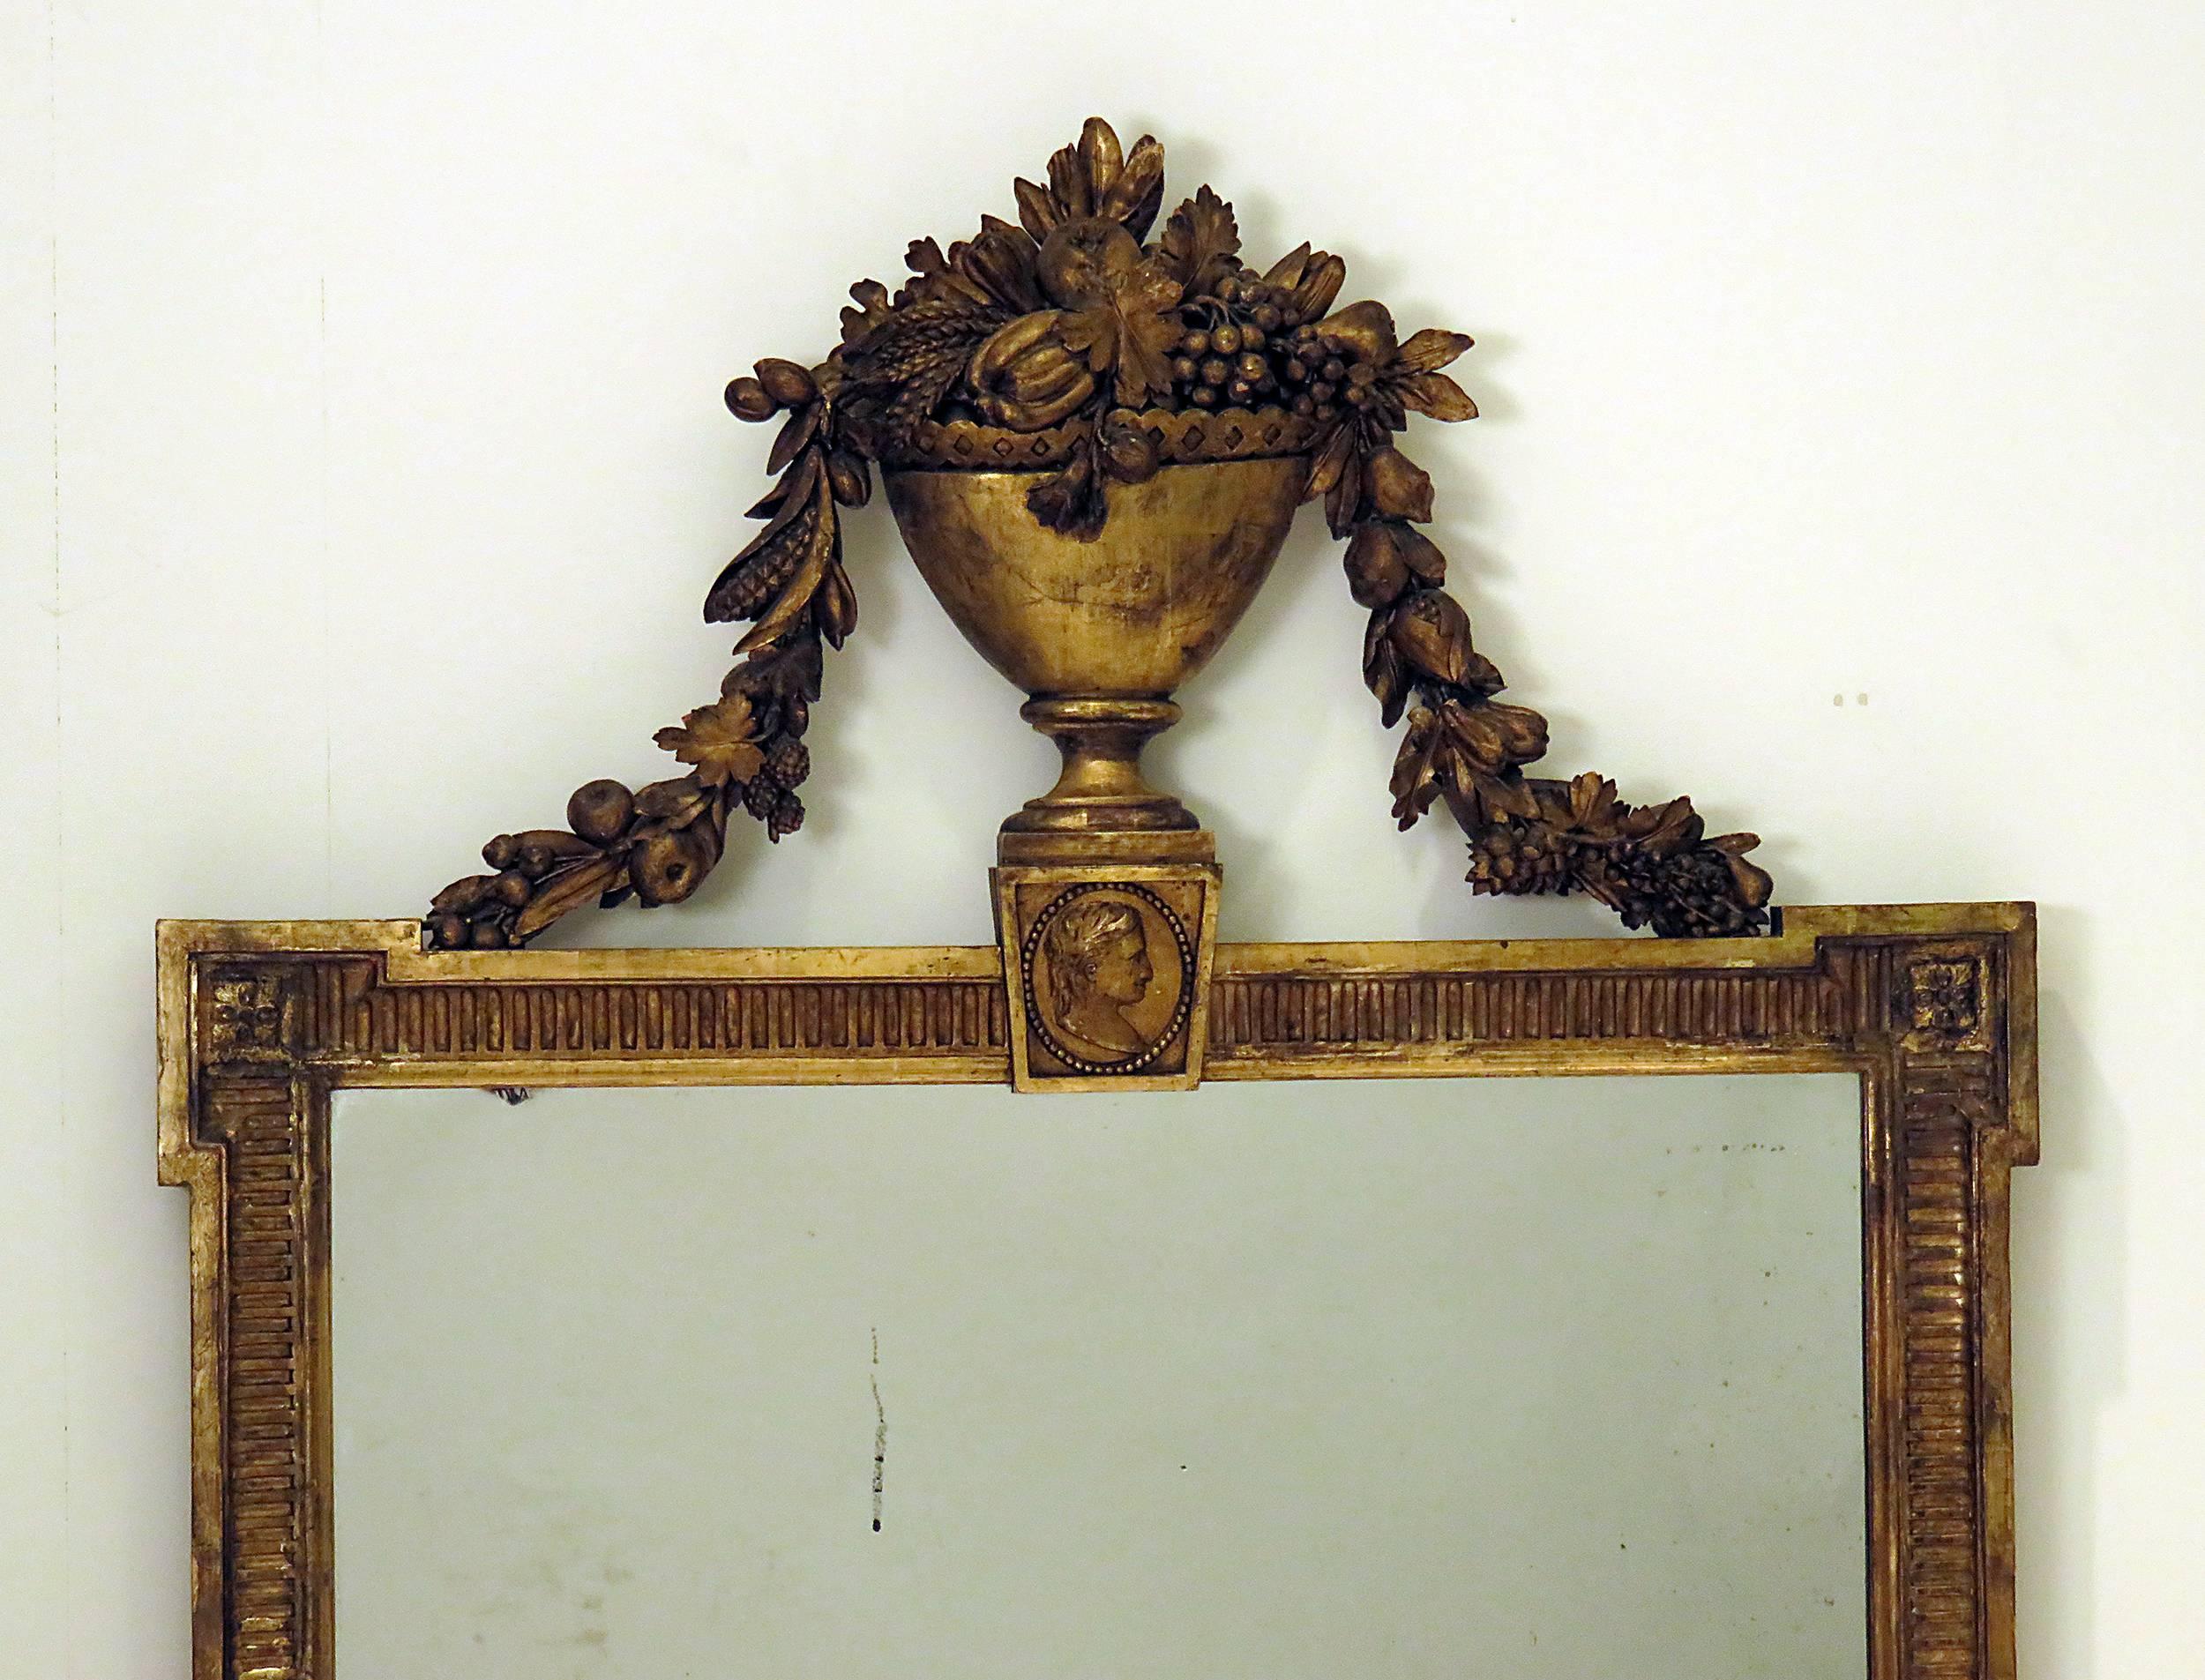 A 19th century French or Swedish giltwood over mantel mirror, circa 1820. The mirror has an urn with garlands flowing down to the top of the mirror. Below the urn is a bust of a man. The frame is deeply carved and the gilded surface has nice color